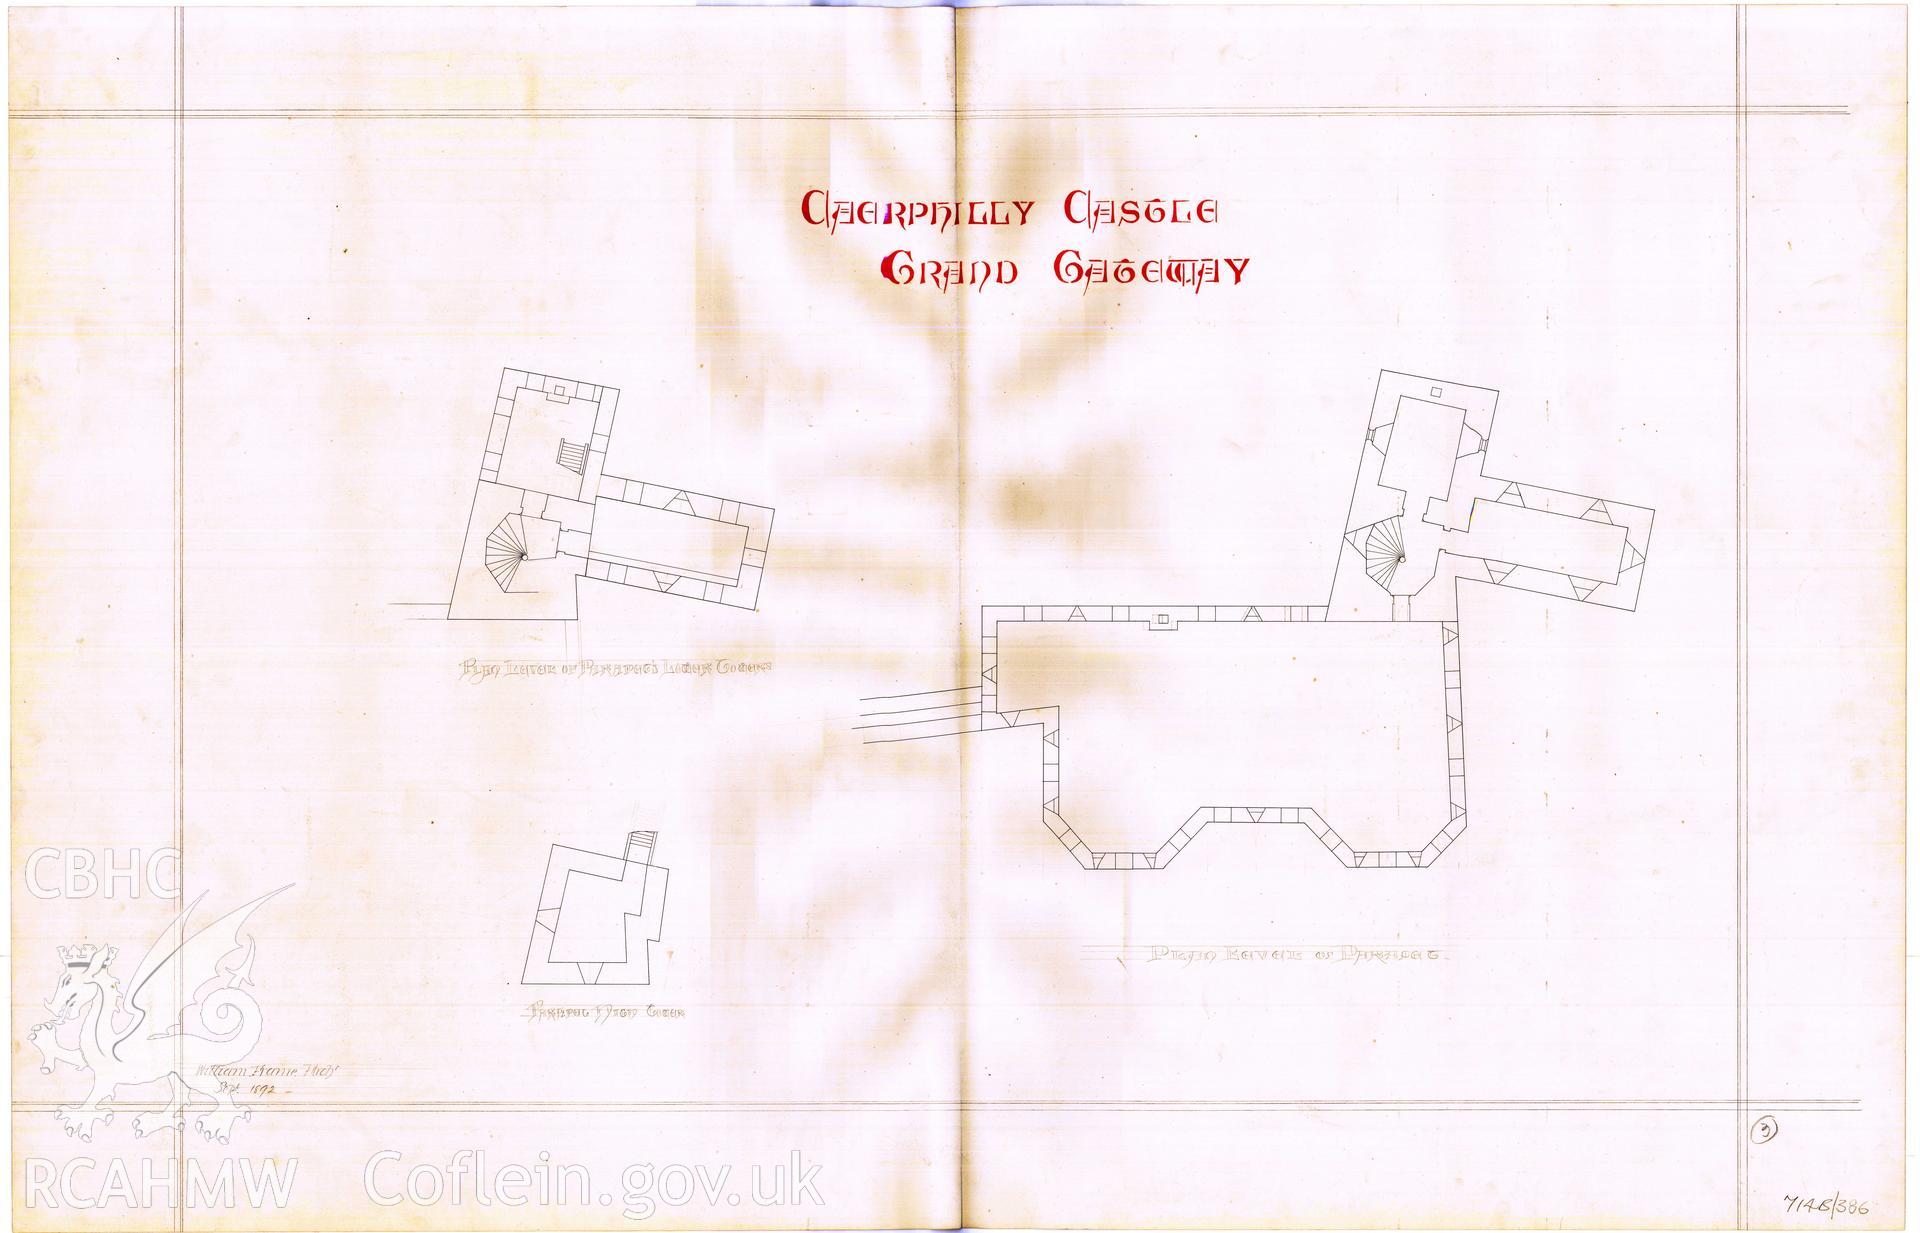 Cadw guardianship monument drawing of Caerphilly Castle. Grand Gateway Plans. Cadw Ref. No:714B/386. Scale 1:96.